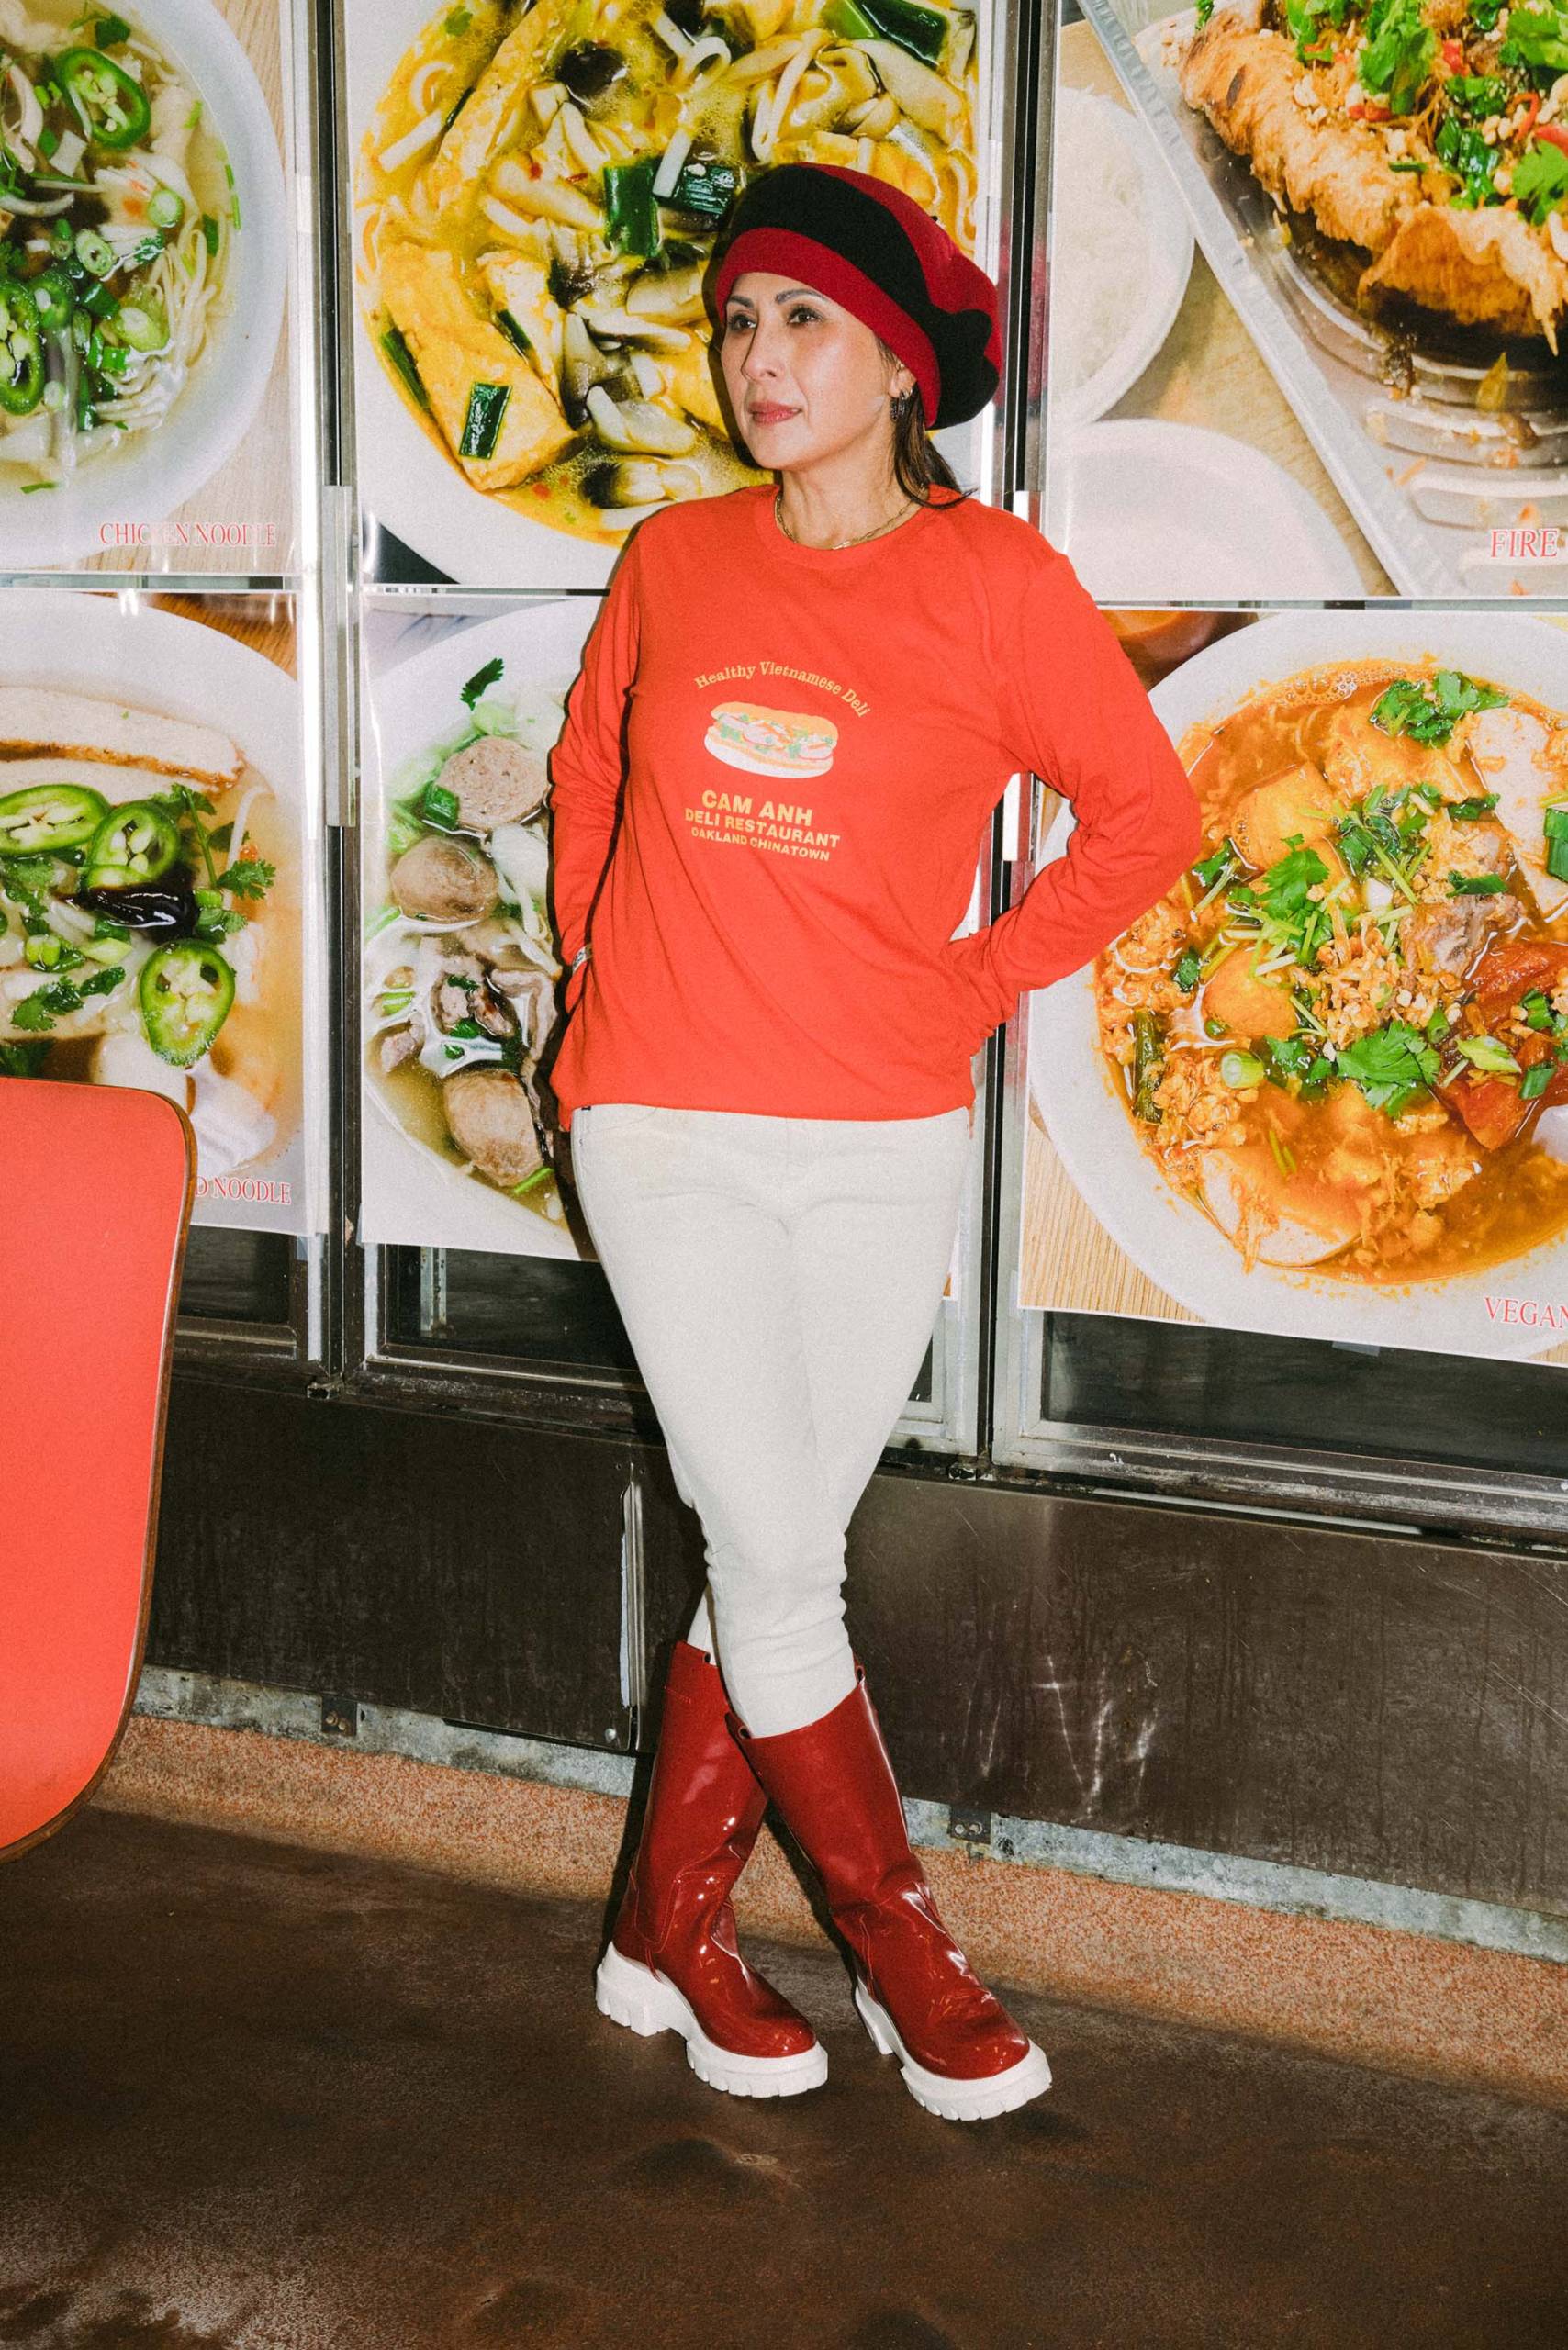 Anh Nguyen poses in a poppy orange long-sleeved tee and a stylish hat and boots, inside her restaurant Cam Anh.